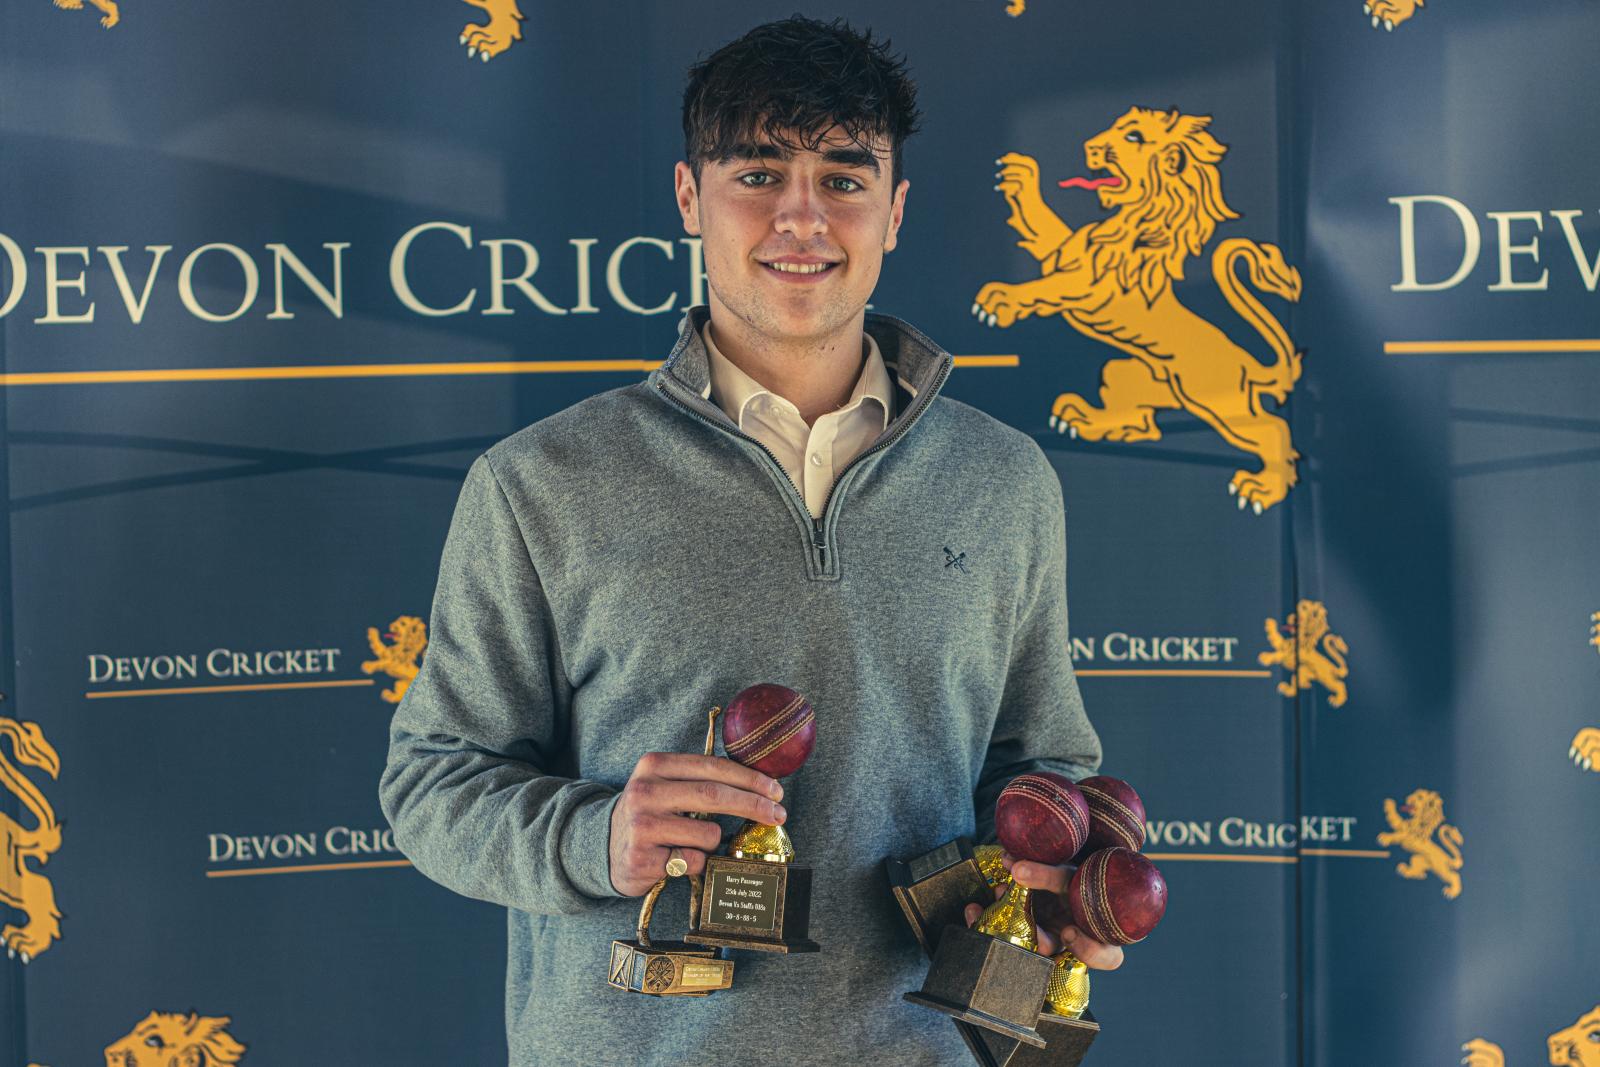 Under 18 Boys Bowler of the Year, Harry Passenger.